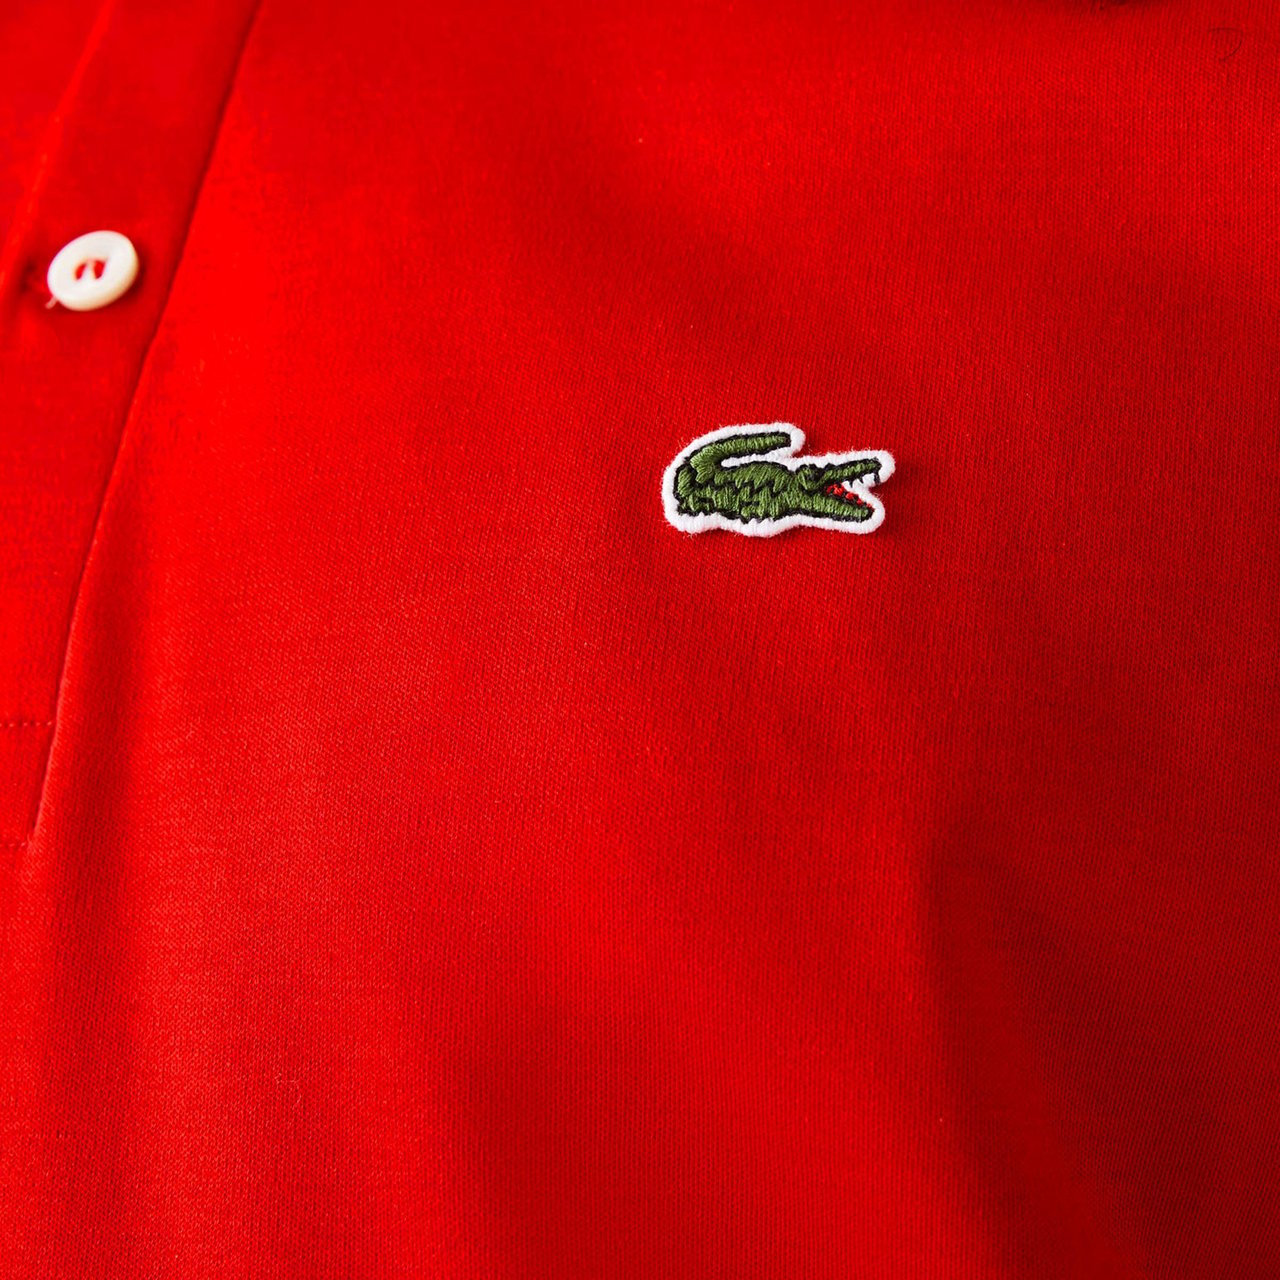 Lacoste Polo Man Dh2050-240 Rood